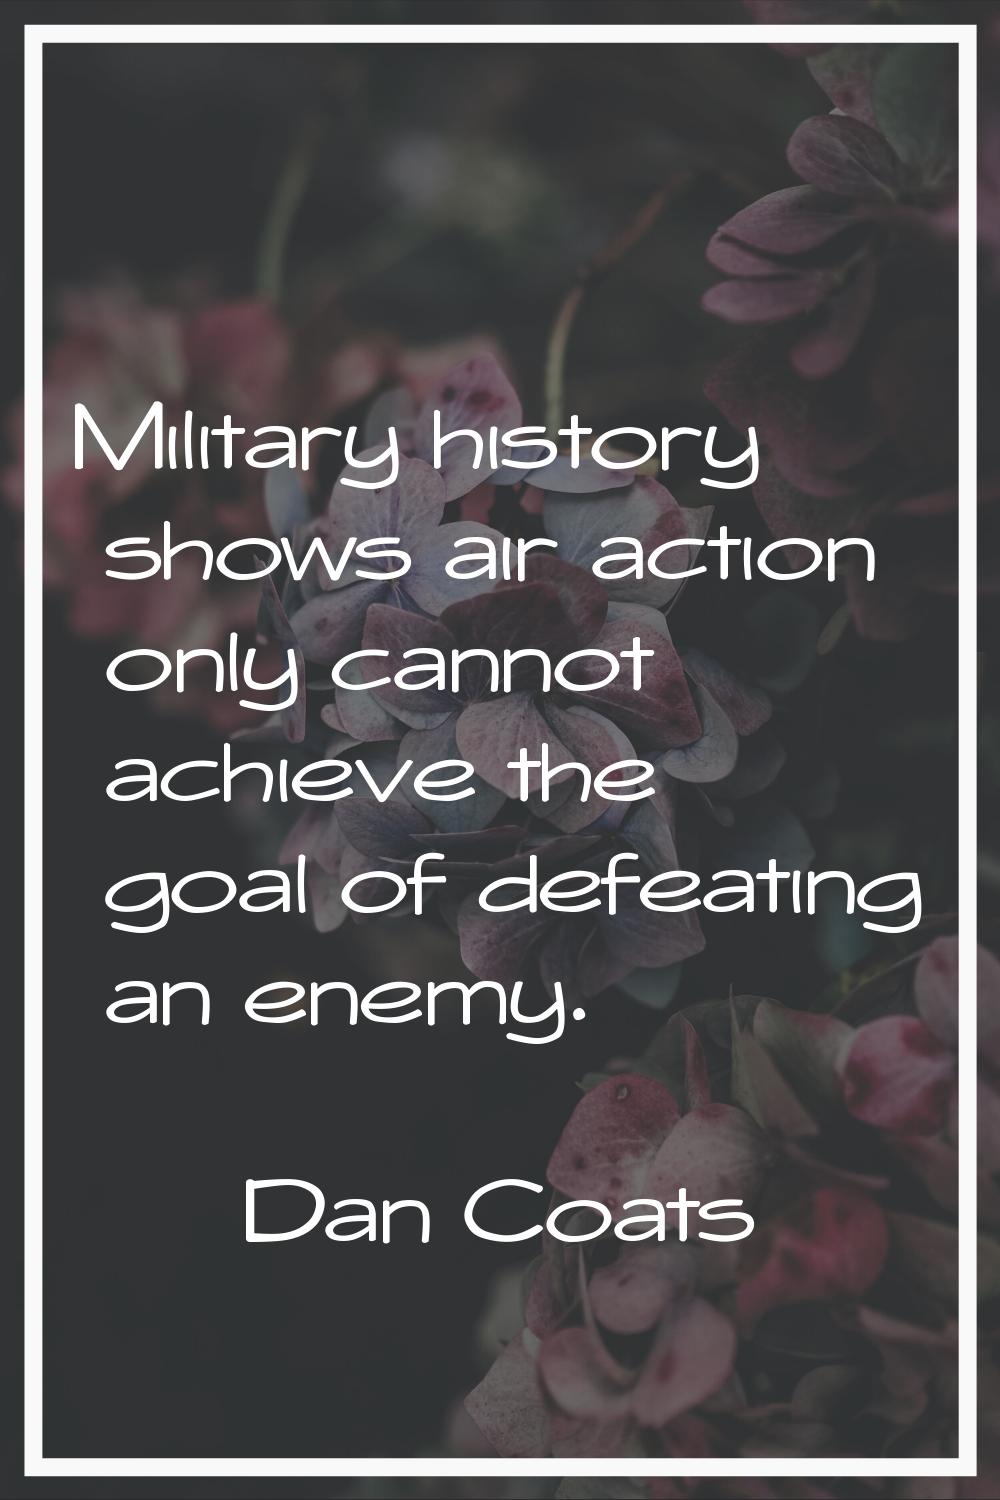 Military history shows air action only cannot achieve the goal of defeating an enemy.